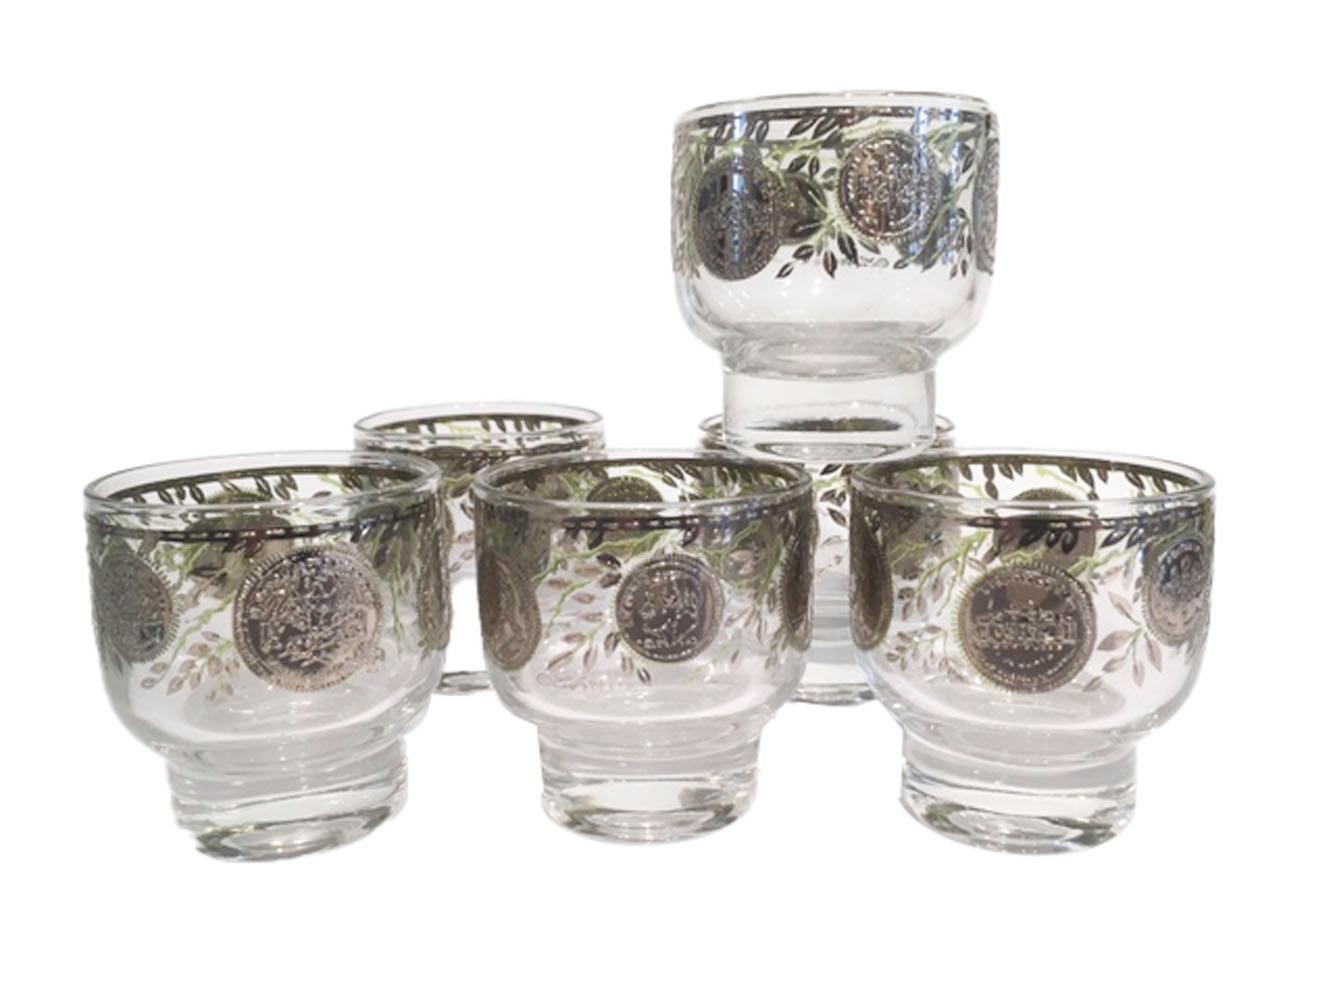 Vintage Culver Glass Cocktail Set in the 